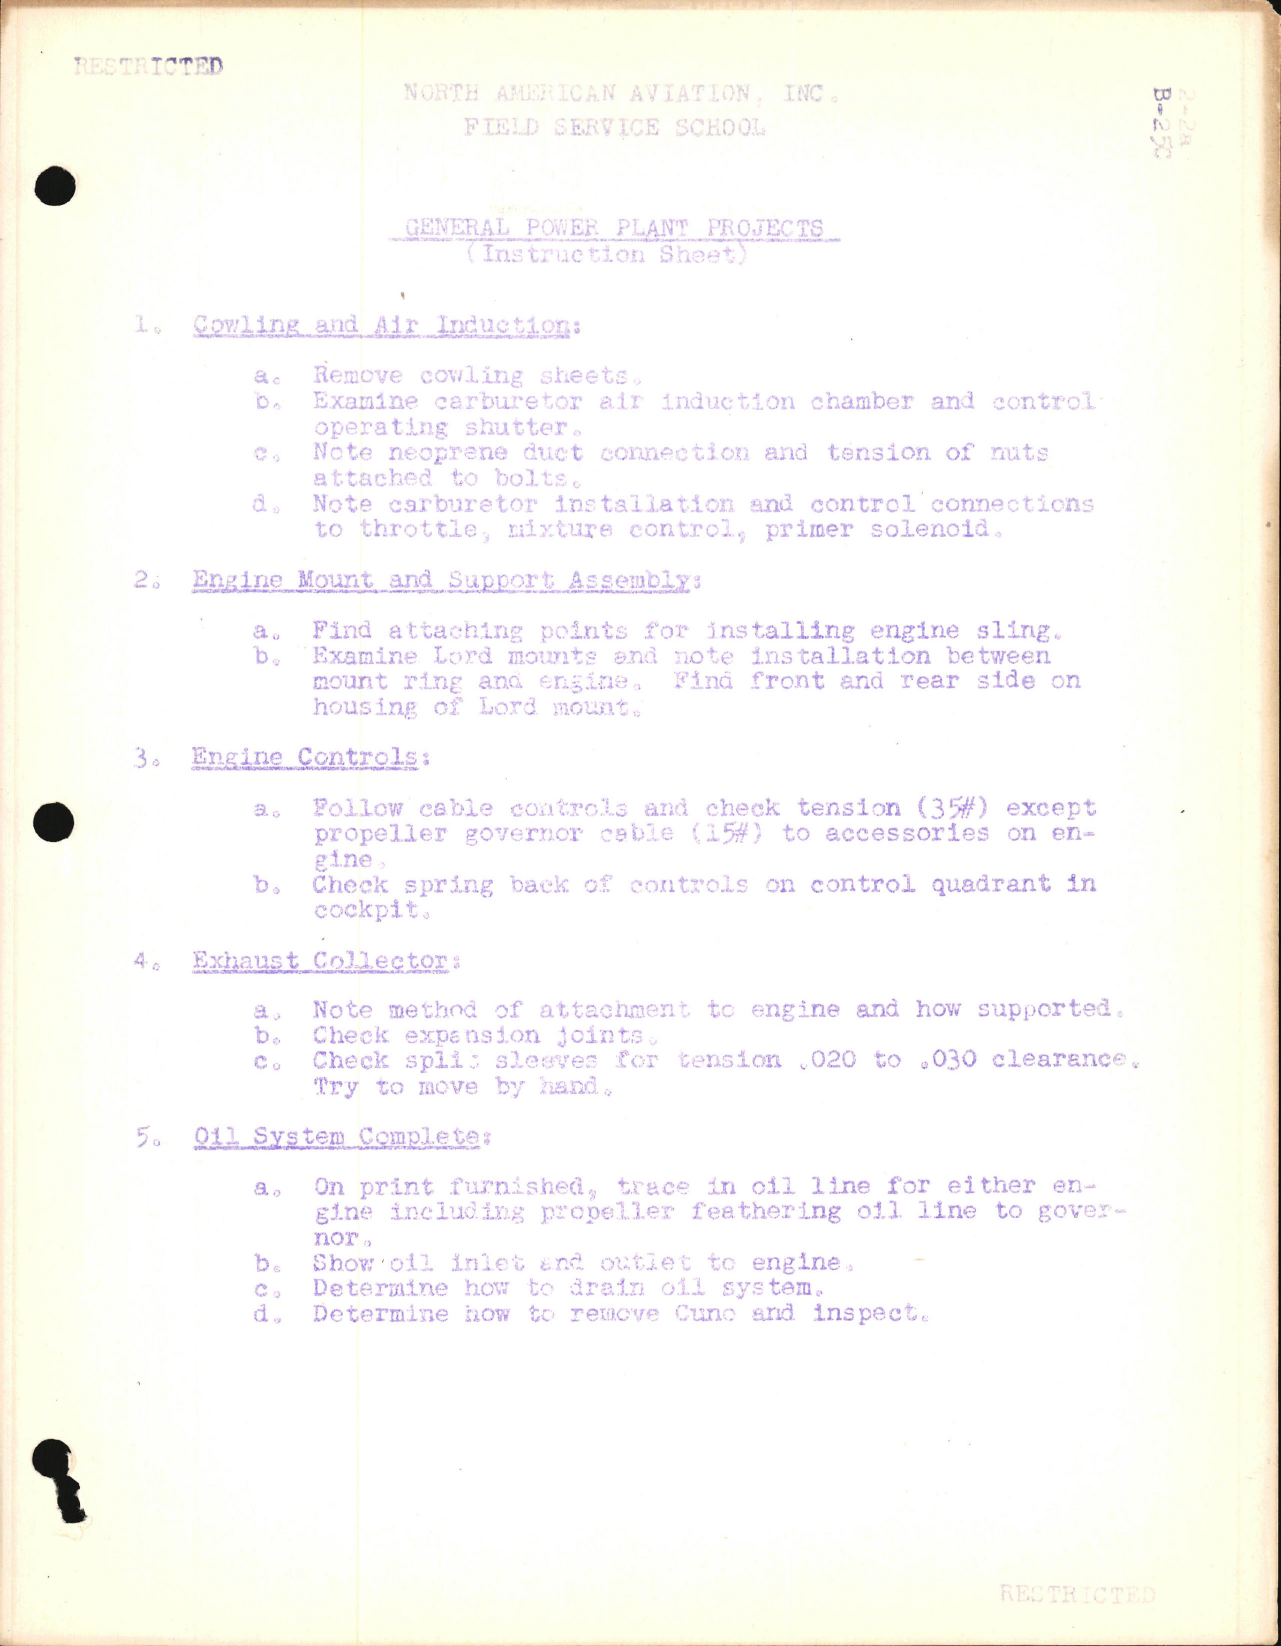 Sample page 5 from AirCorps Library document: Service School Lectures - Power Plant